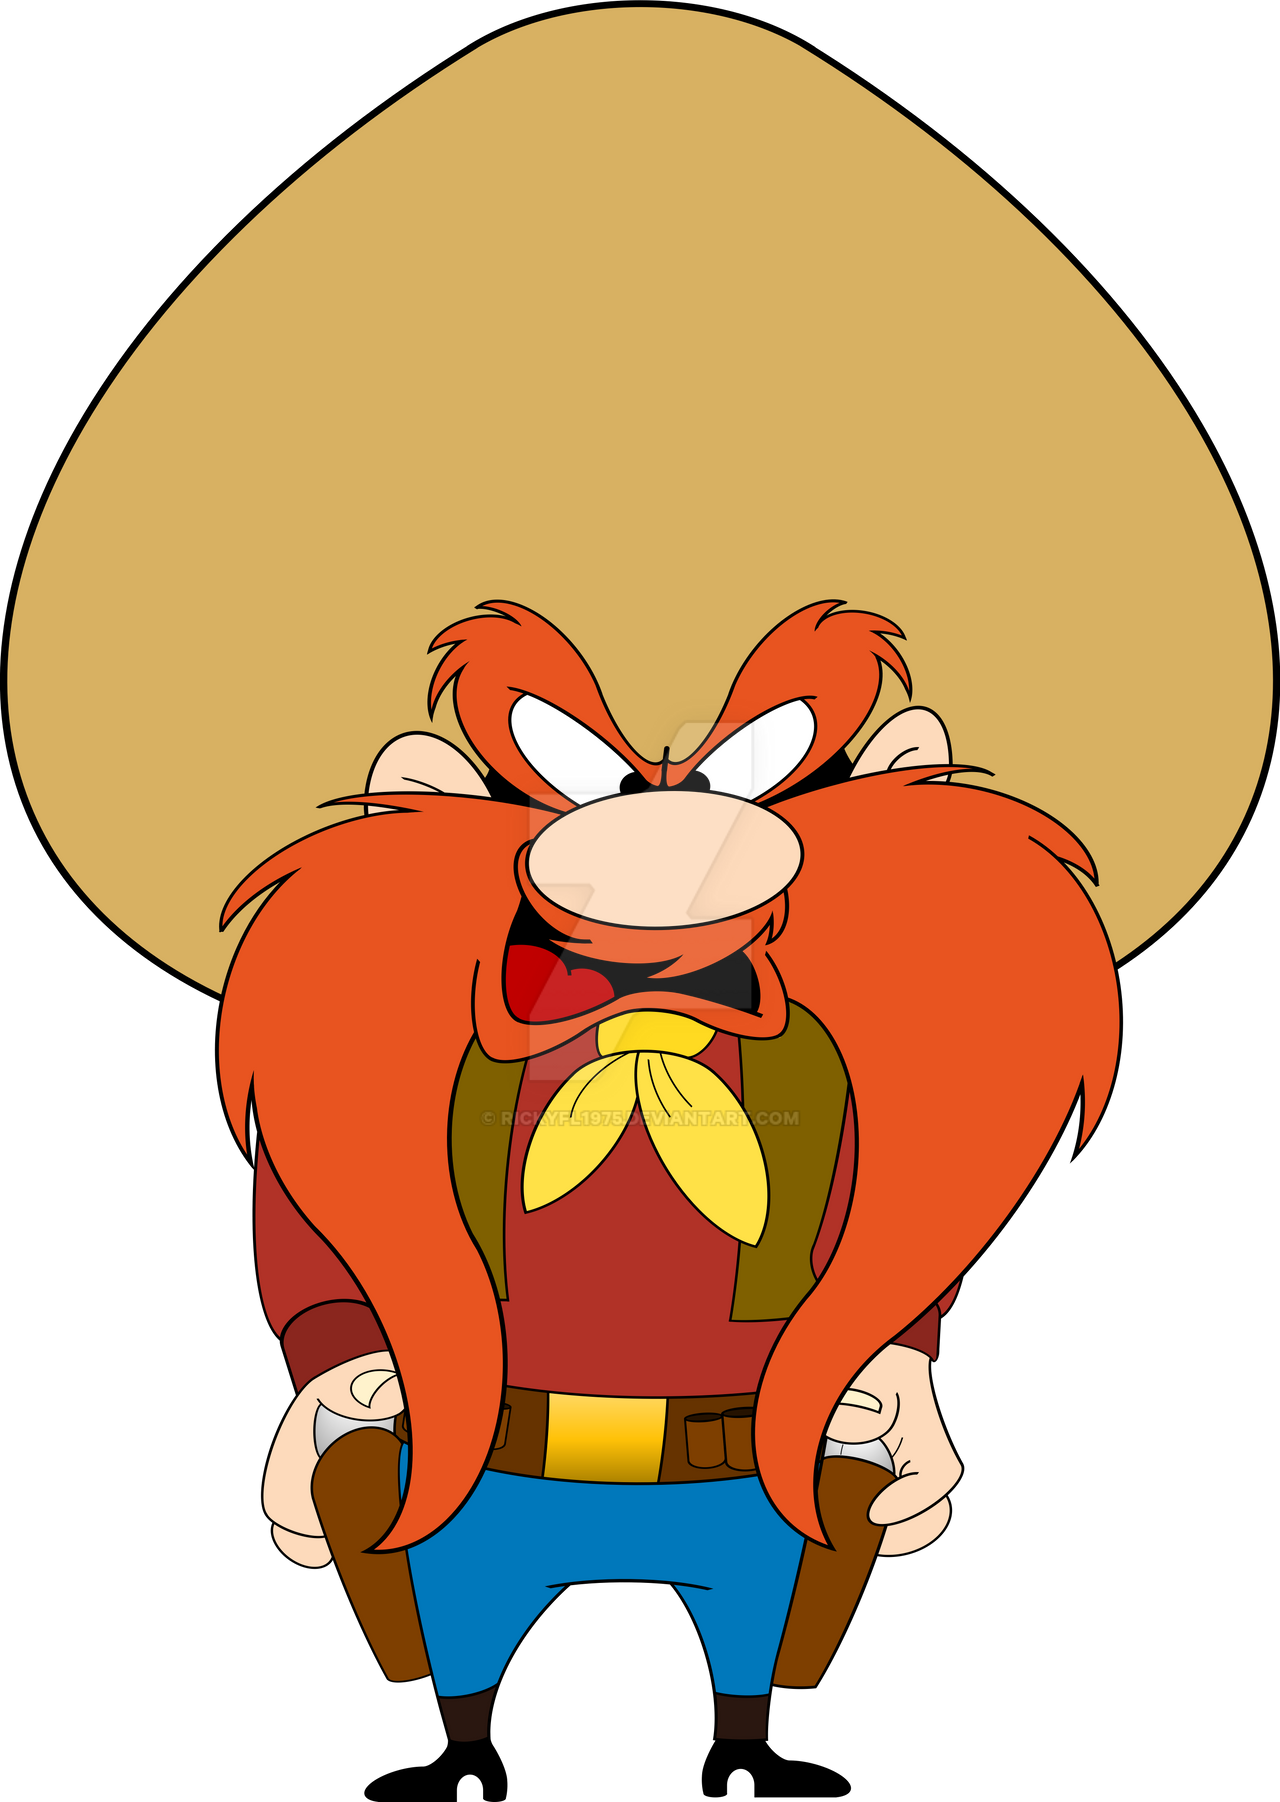 Looney Tunes - Yosemite Sam - Draw! - Completed by RickyFL1975 on